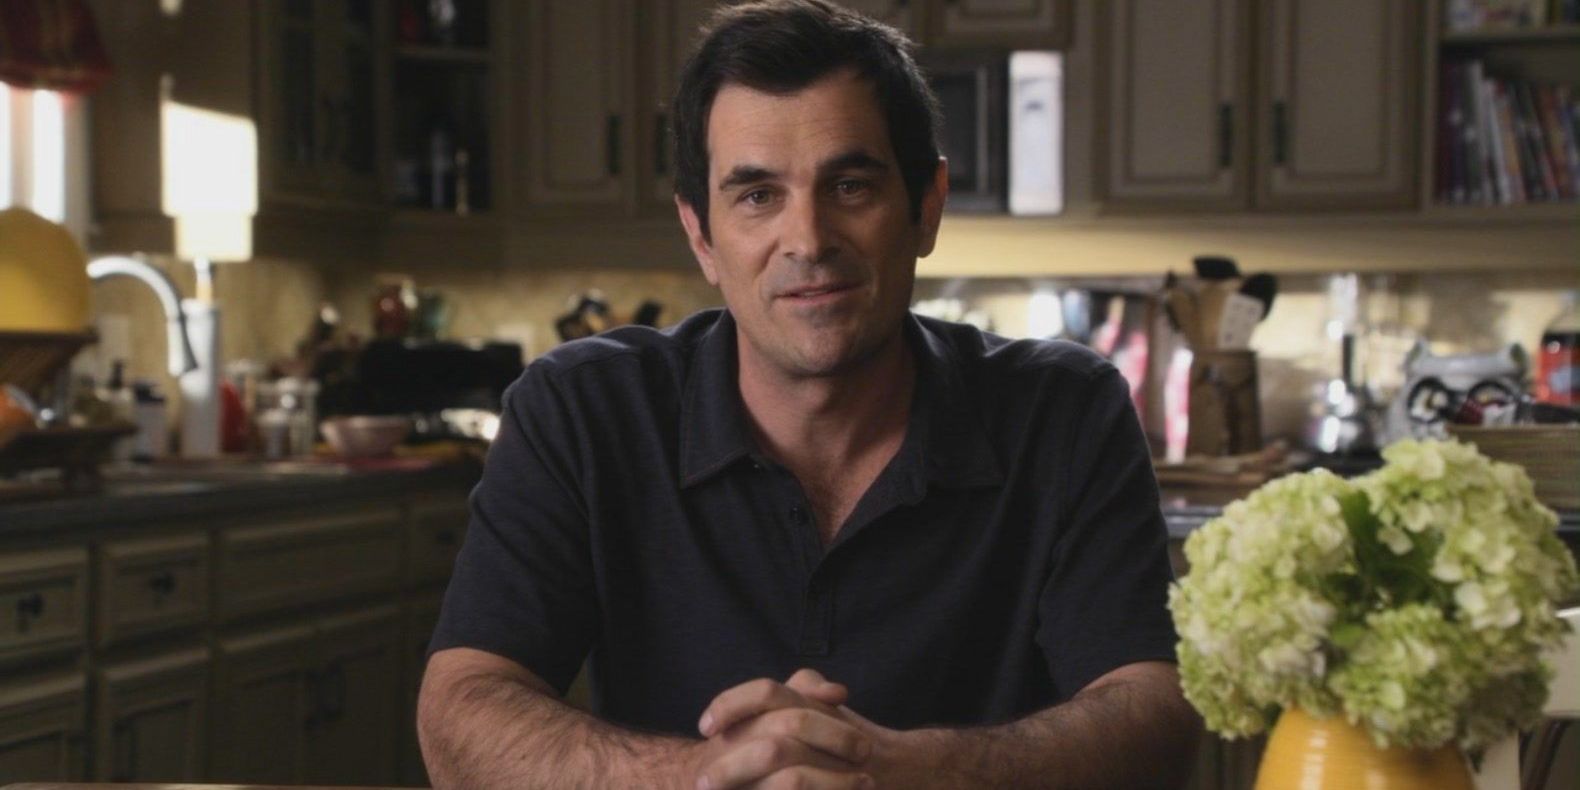 Phil Dunphy in a confessional in his kitchen on Modern Family